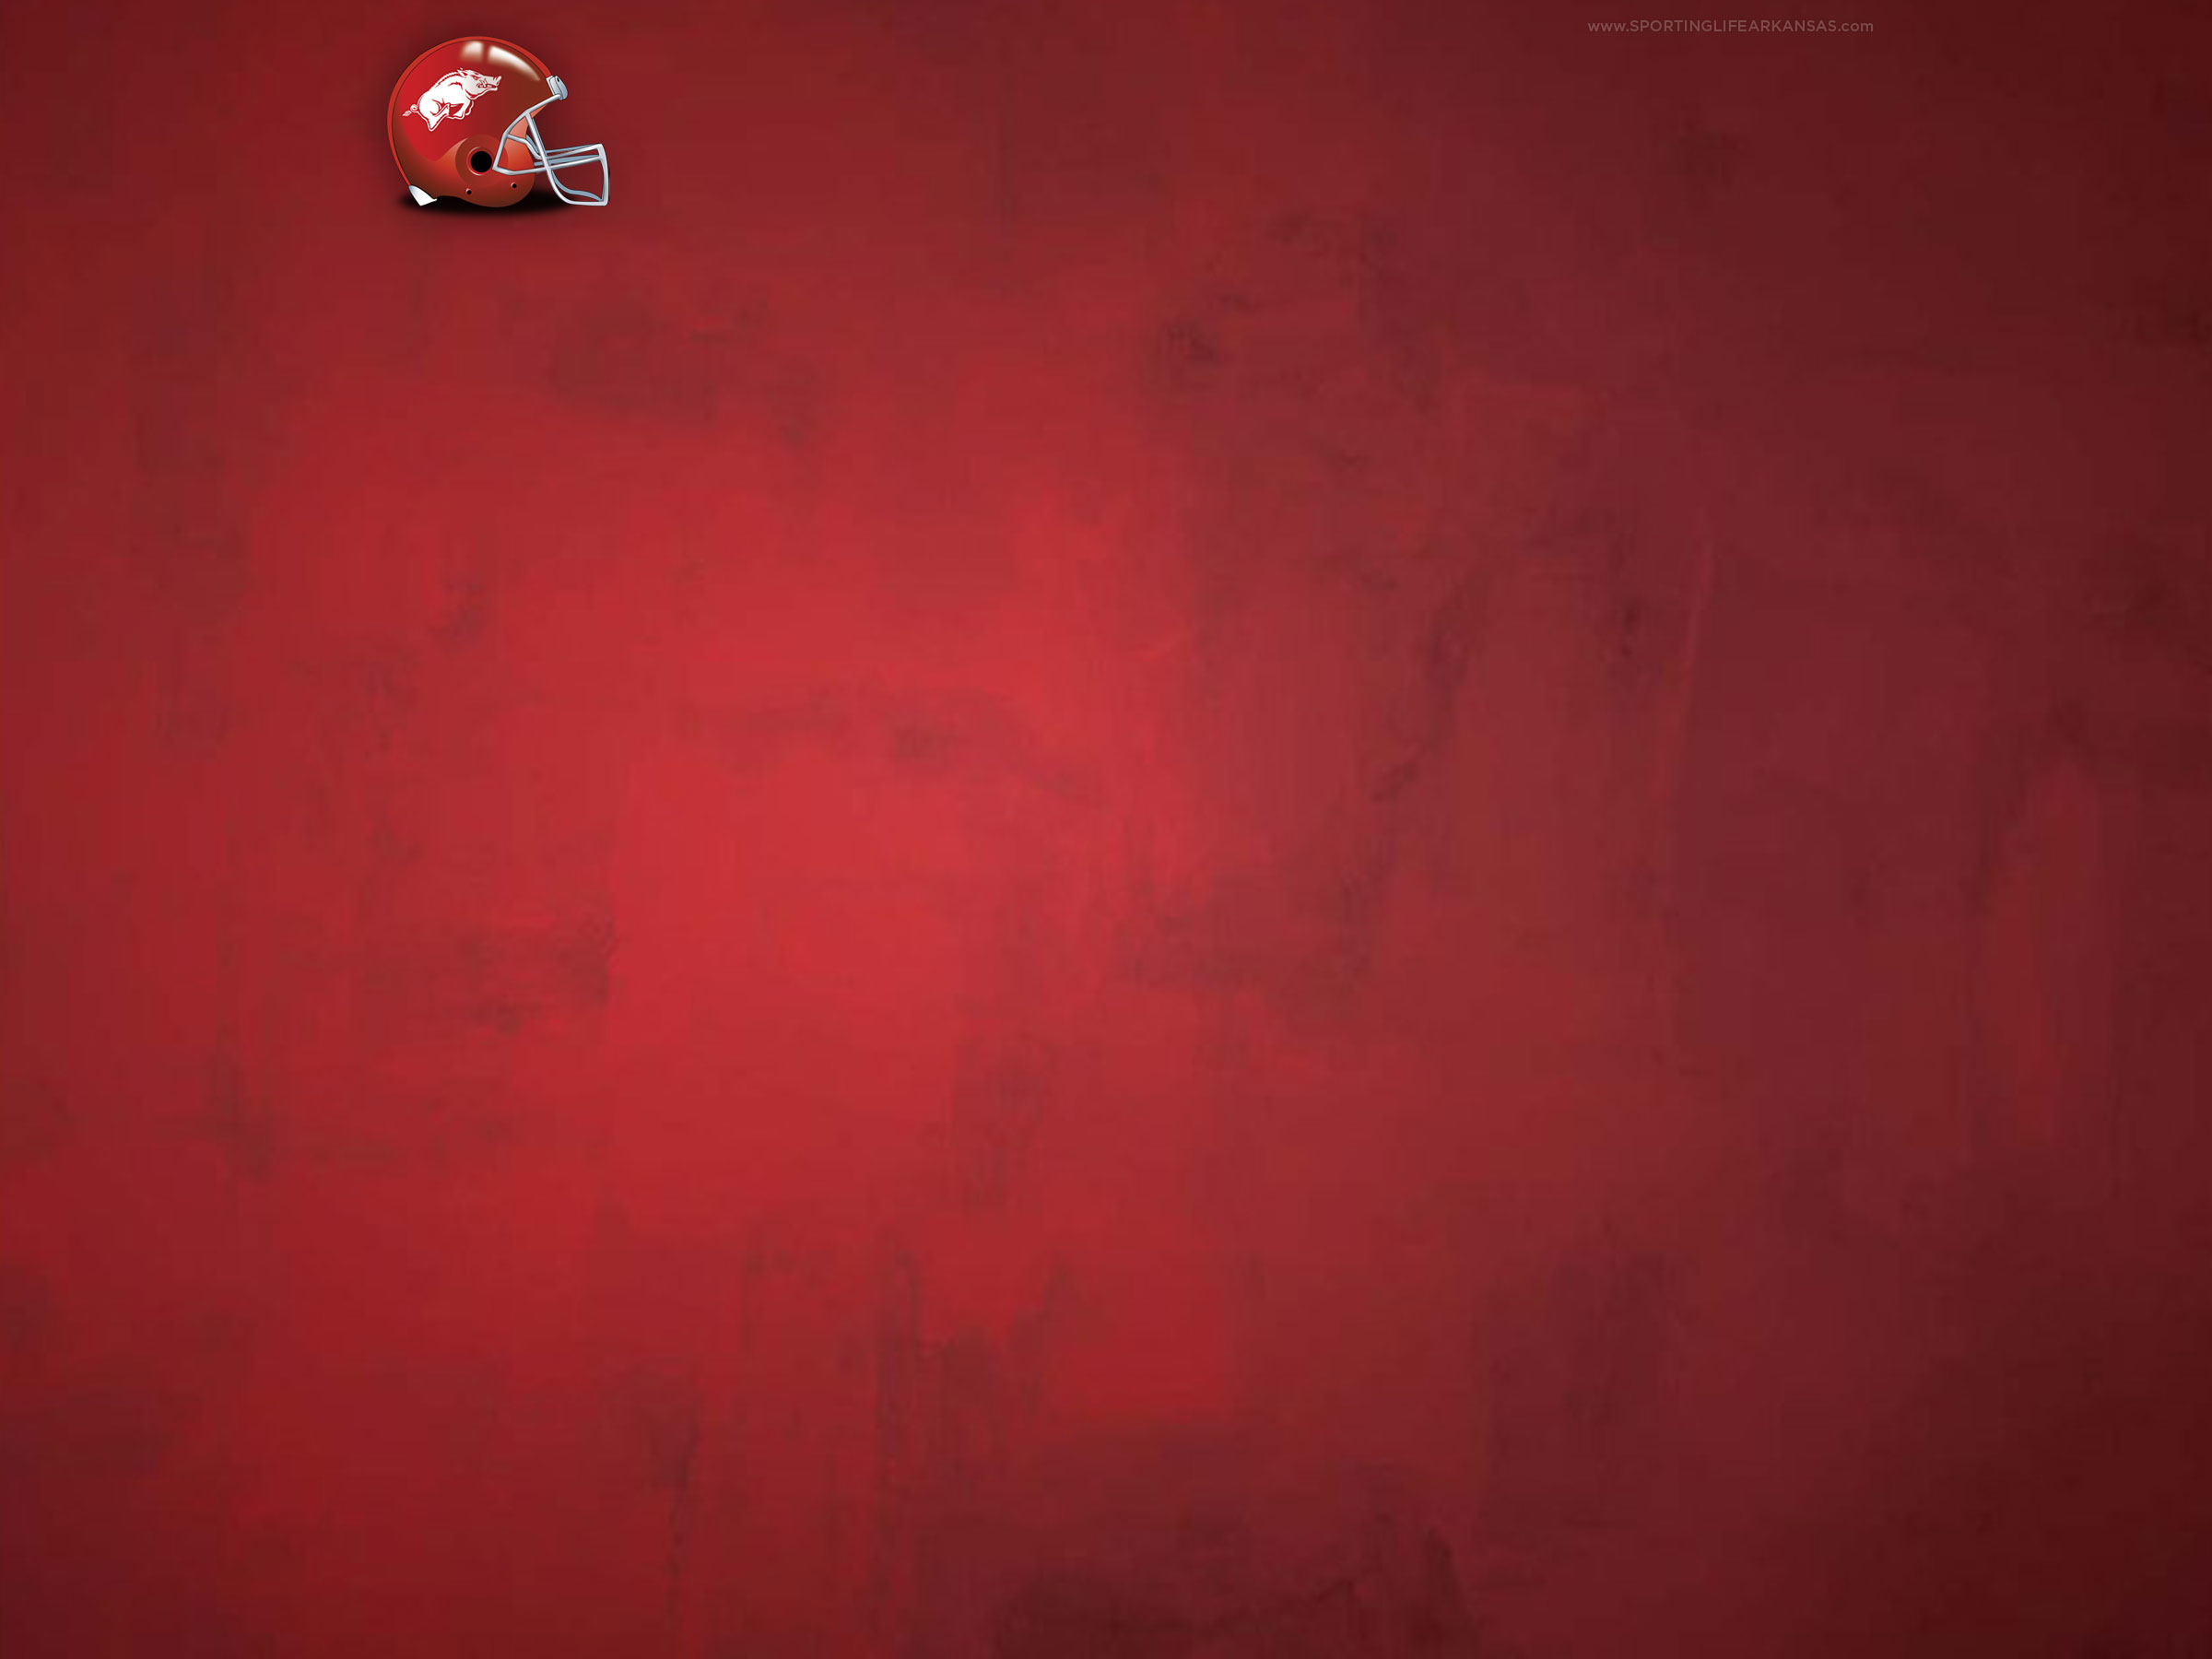 Razorback and Red Wolves Twitter Backgrounds - Sporting Life Arkansas